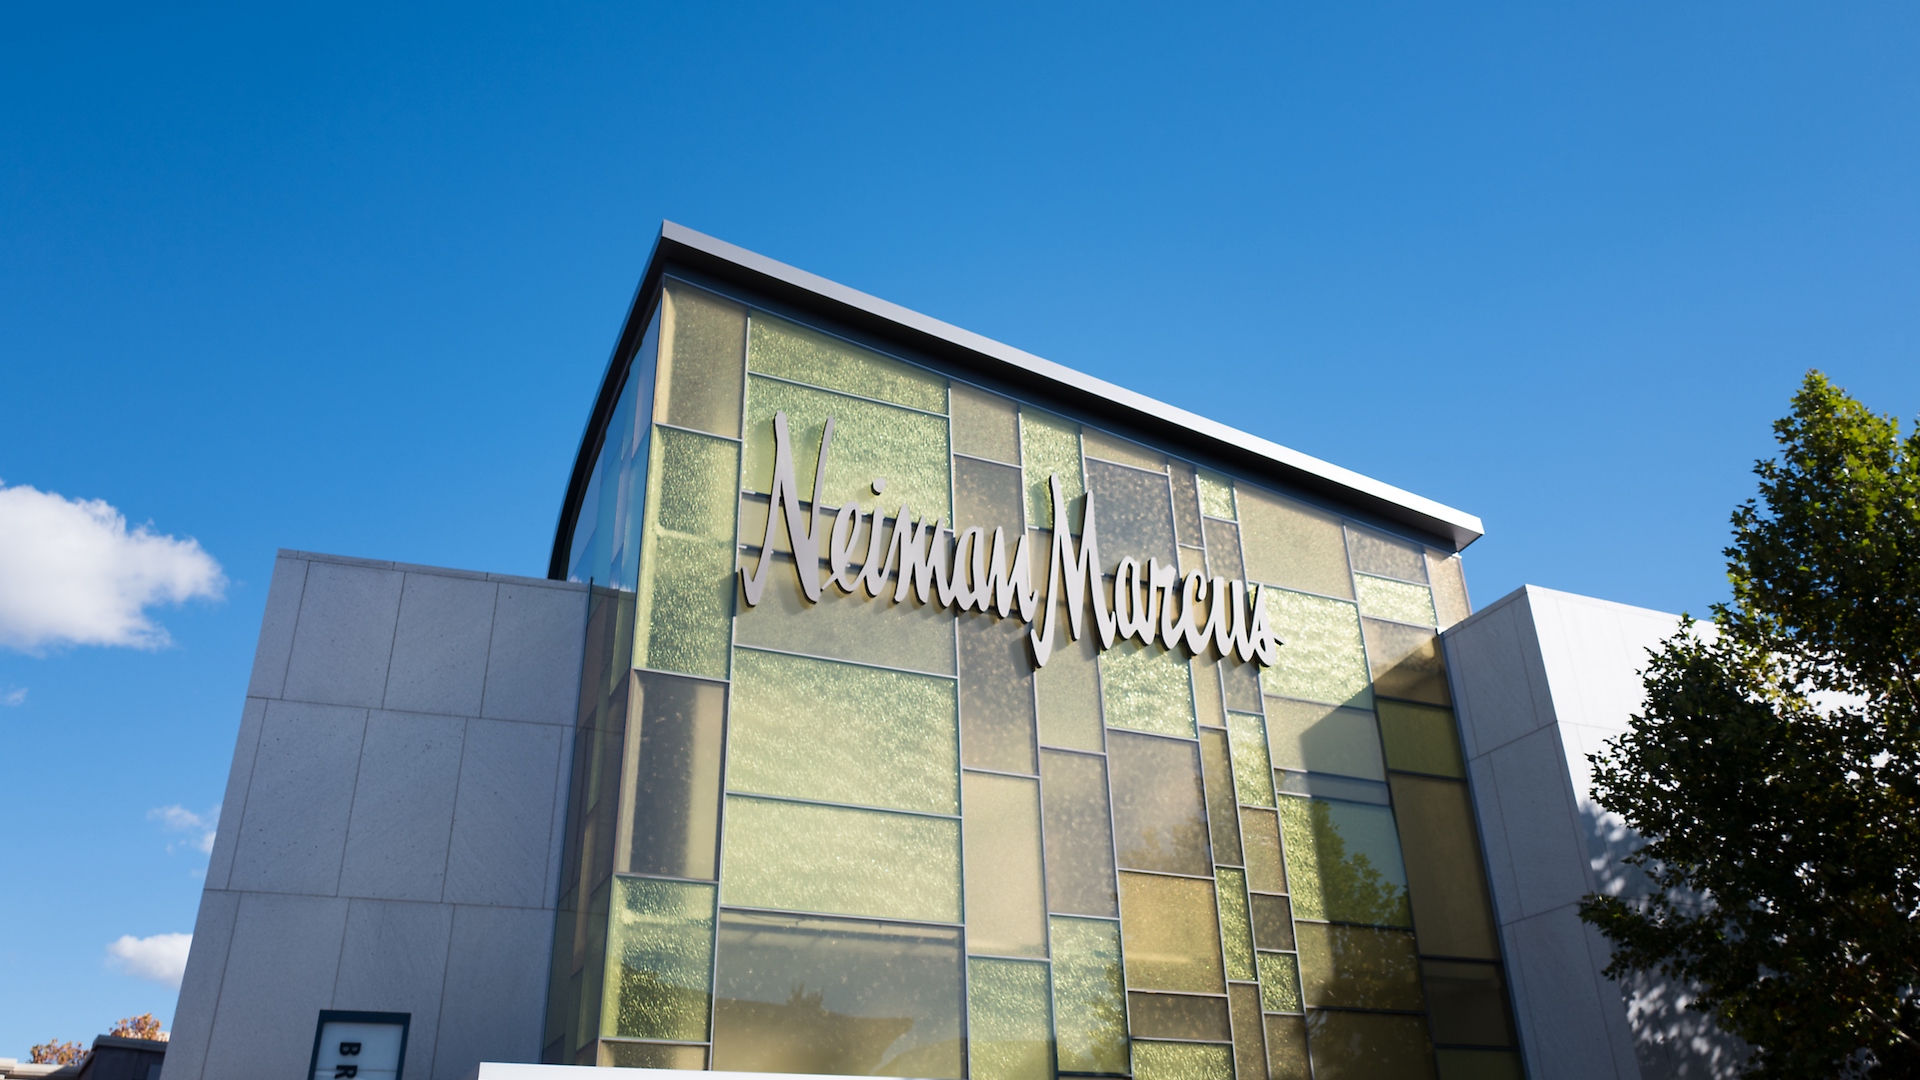 After weeks of rumors, Texas-based Neiman Marcus declares bankruptcy -  CultureMap Houston